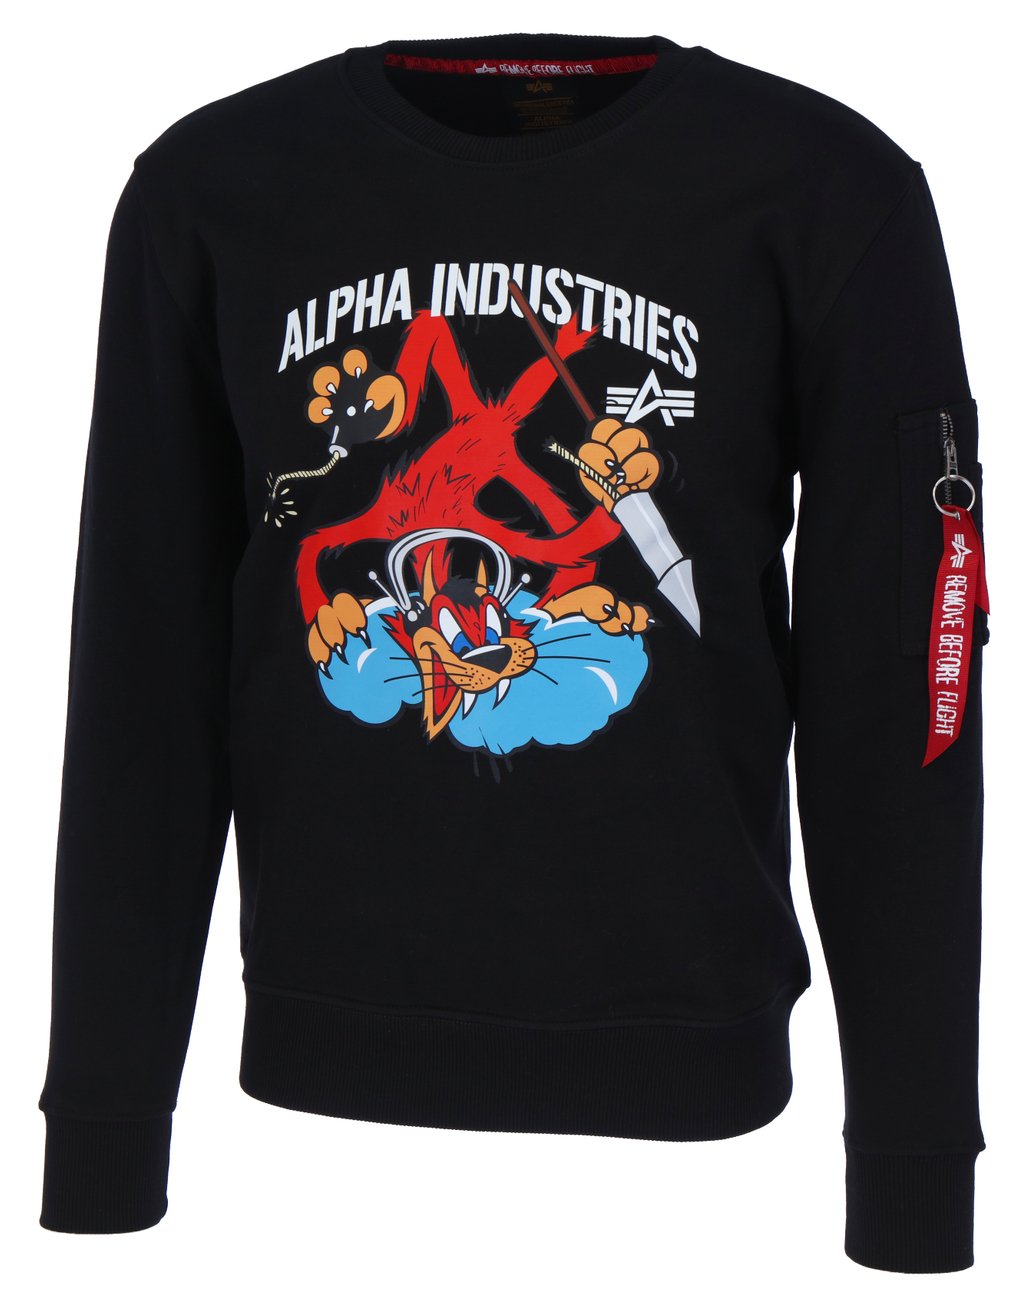 ALPHA INDUSTRIES FIGHTER SQUADRON SWEATER Herren Sweatshirt - Alpha Industries - SAGATOO - 4059146578078